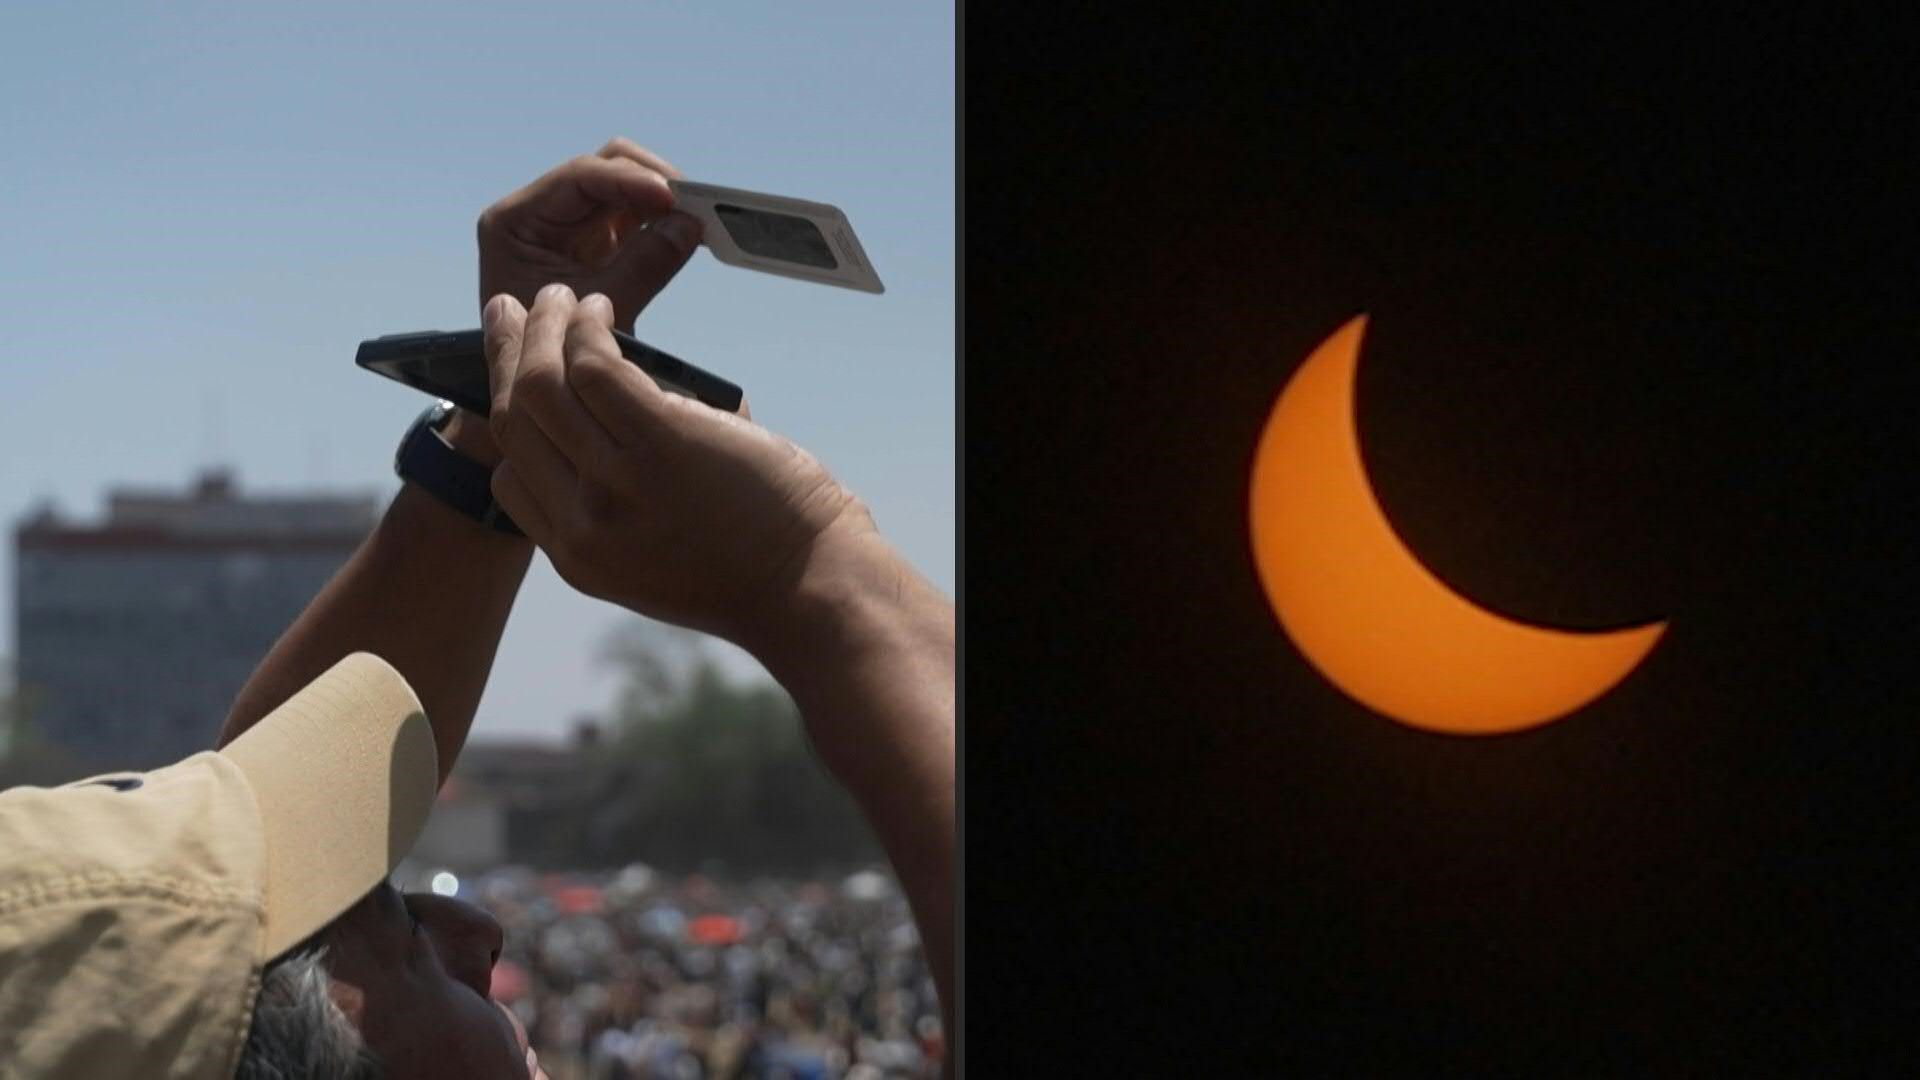 Hundreds of Mexicans watch total solar eclipse in the capital